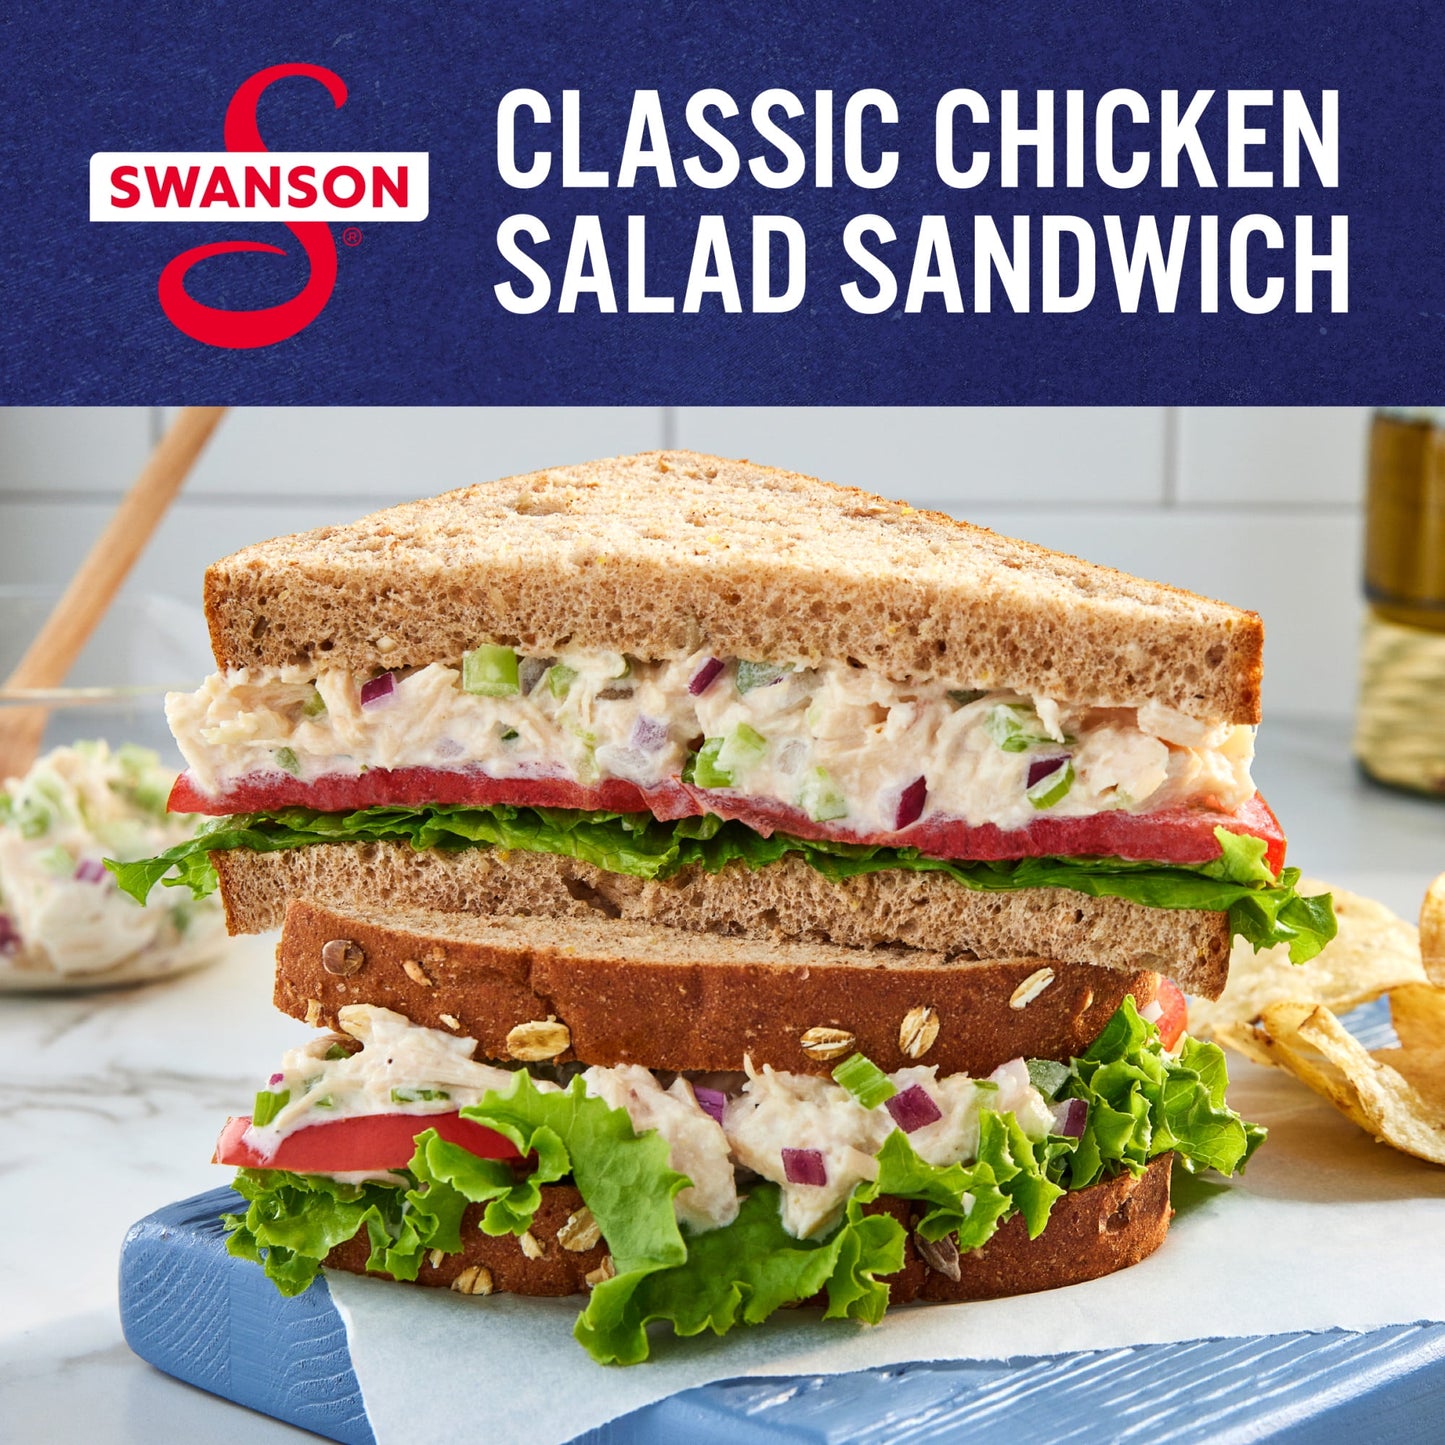 Swanson White Premium Chunk Canned Chicken Breast in Water, Fully Cooked Chicken, 12.5 oz Can